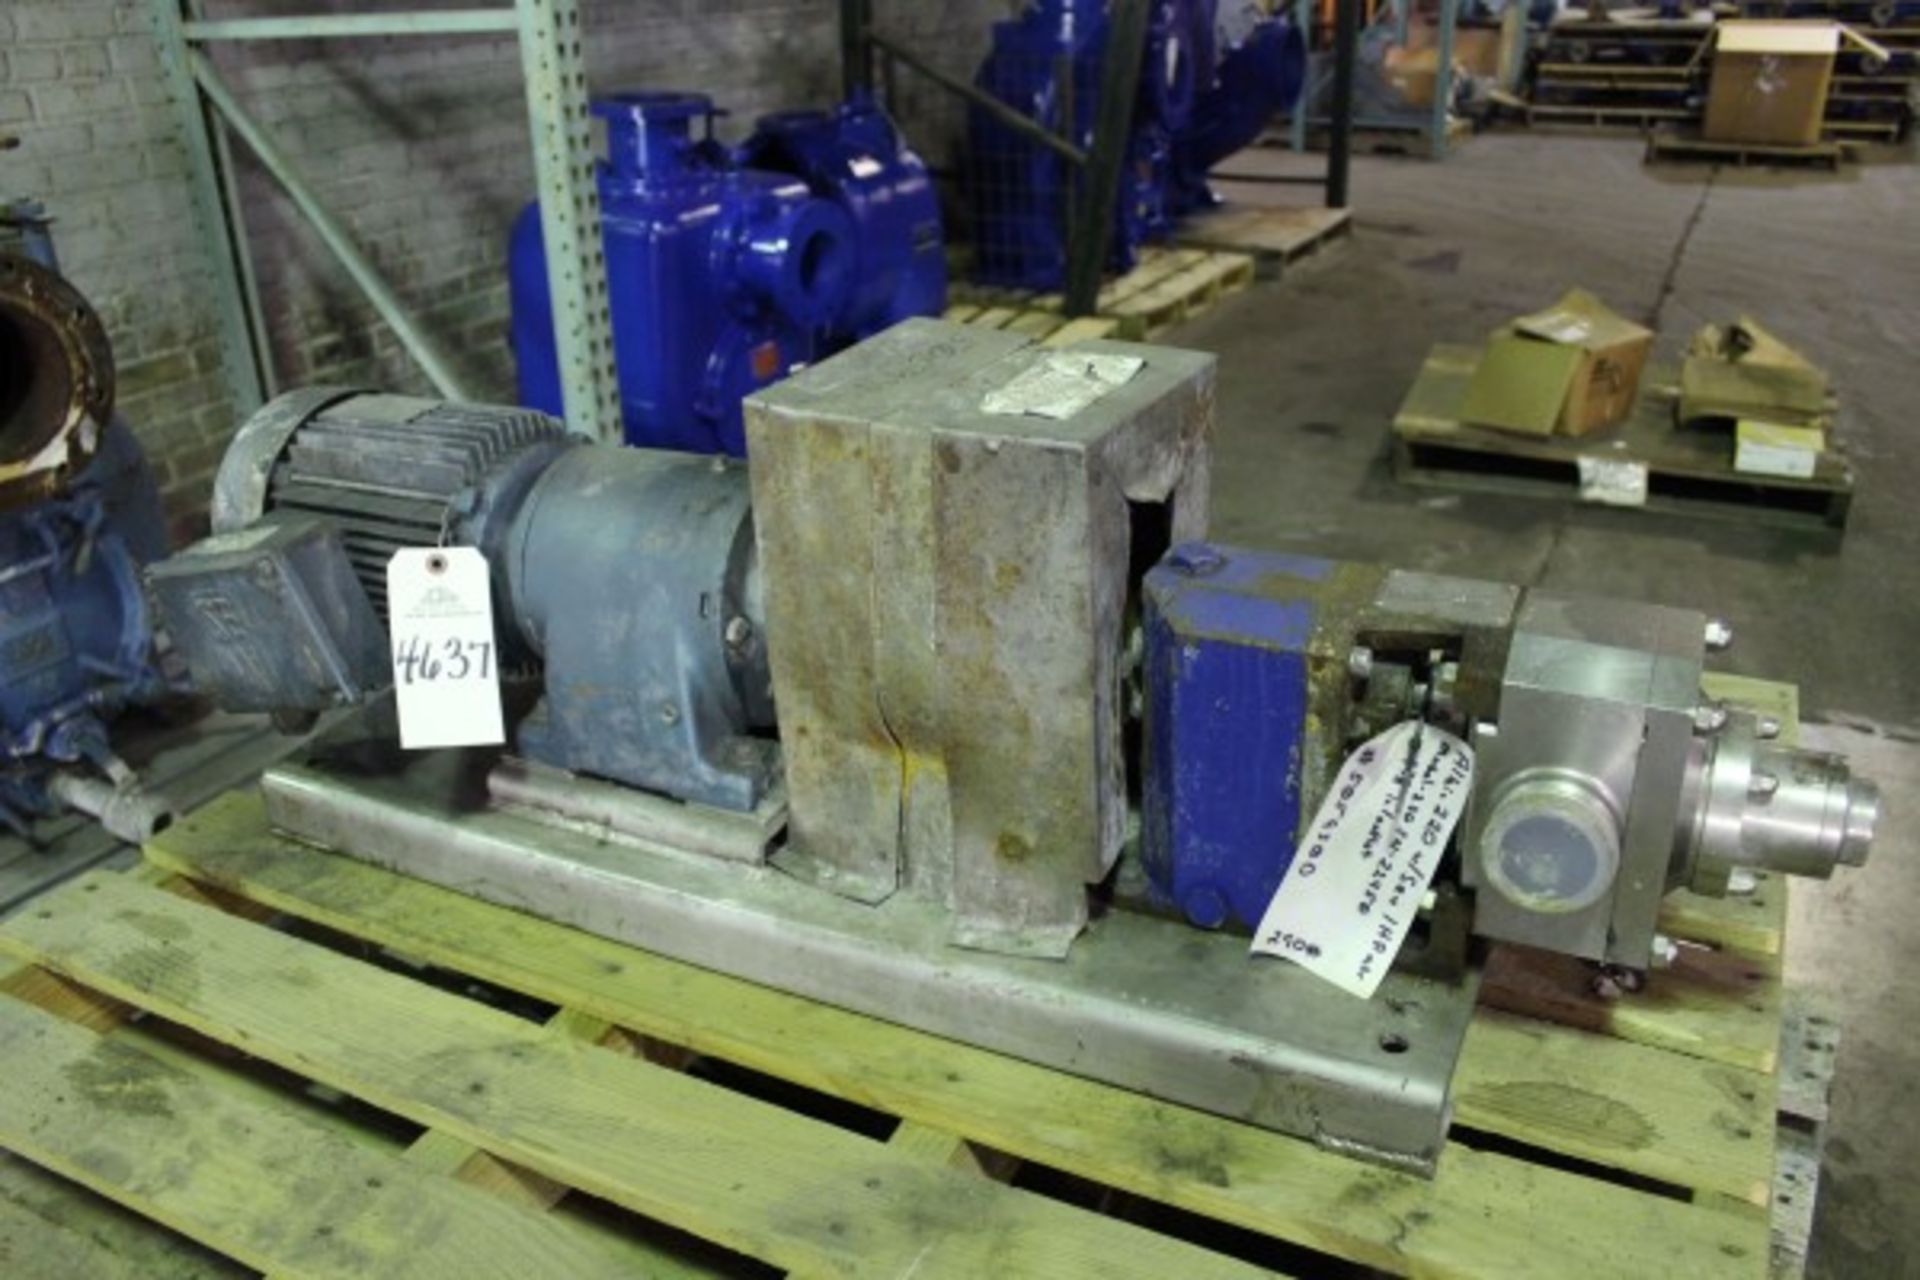 Albie 220 Positive Displacement Pump Skid | Seller to load for $10 per lot or buyers may remove hand